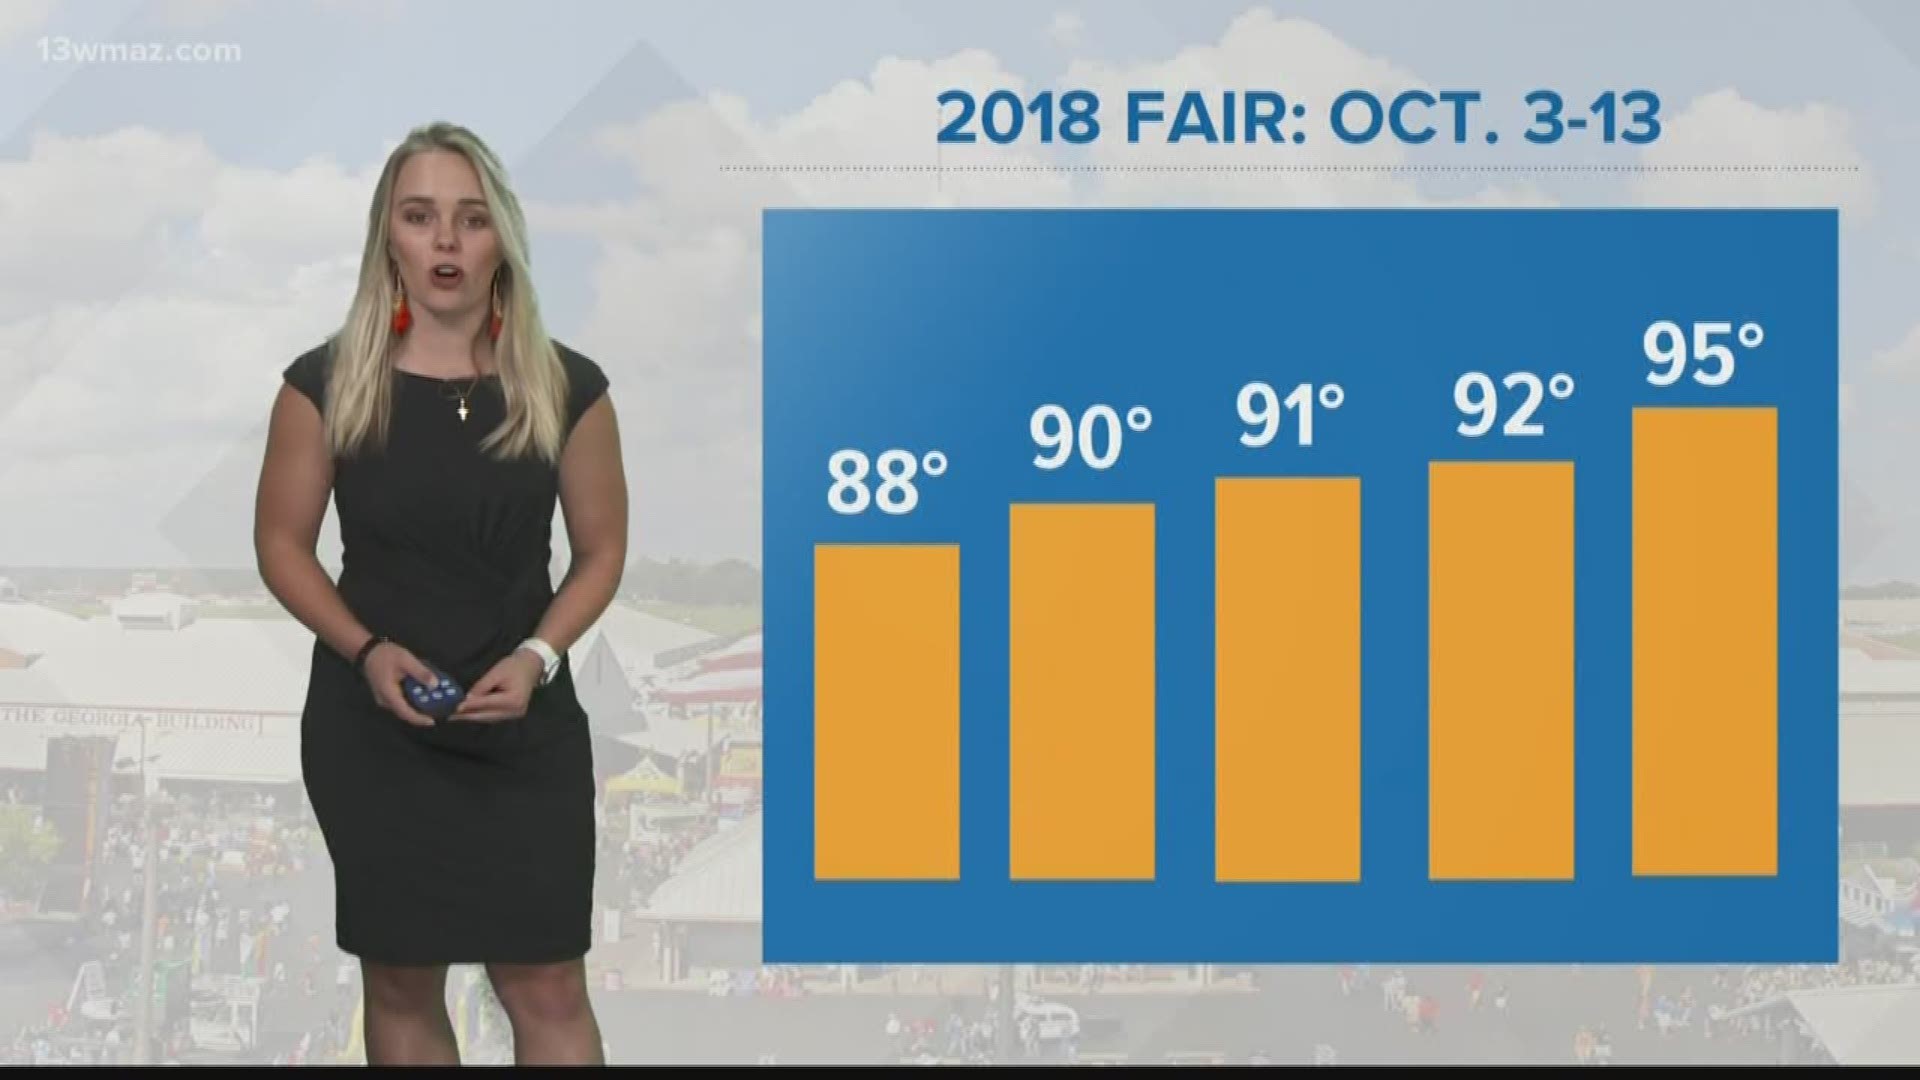 The Georgia National Fair is just a few days away with temperatures not able to shake the 90s this week, but has it always been this hot for the fair?